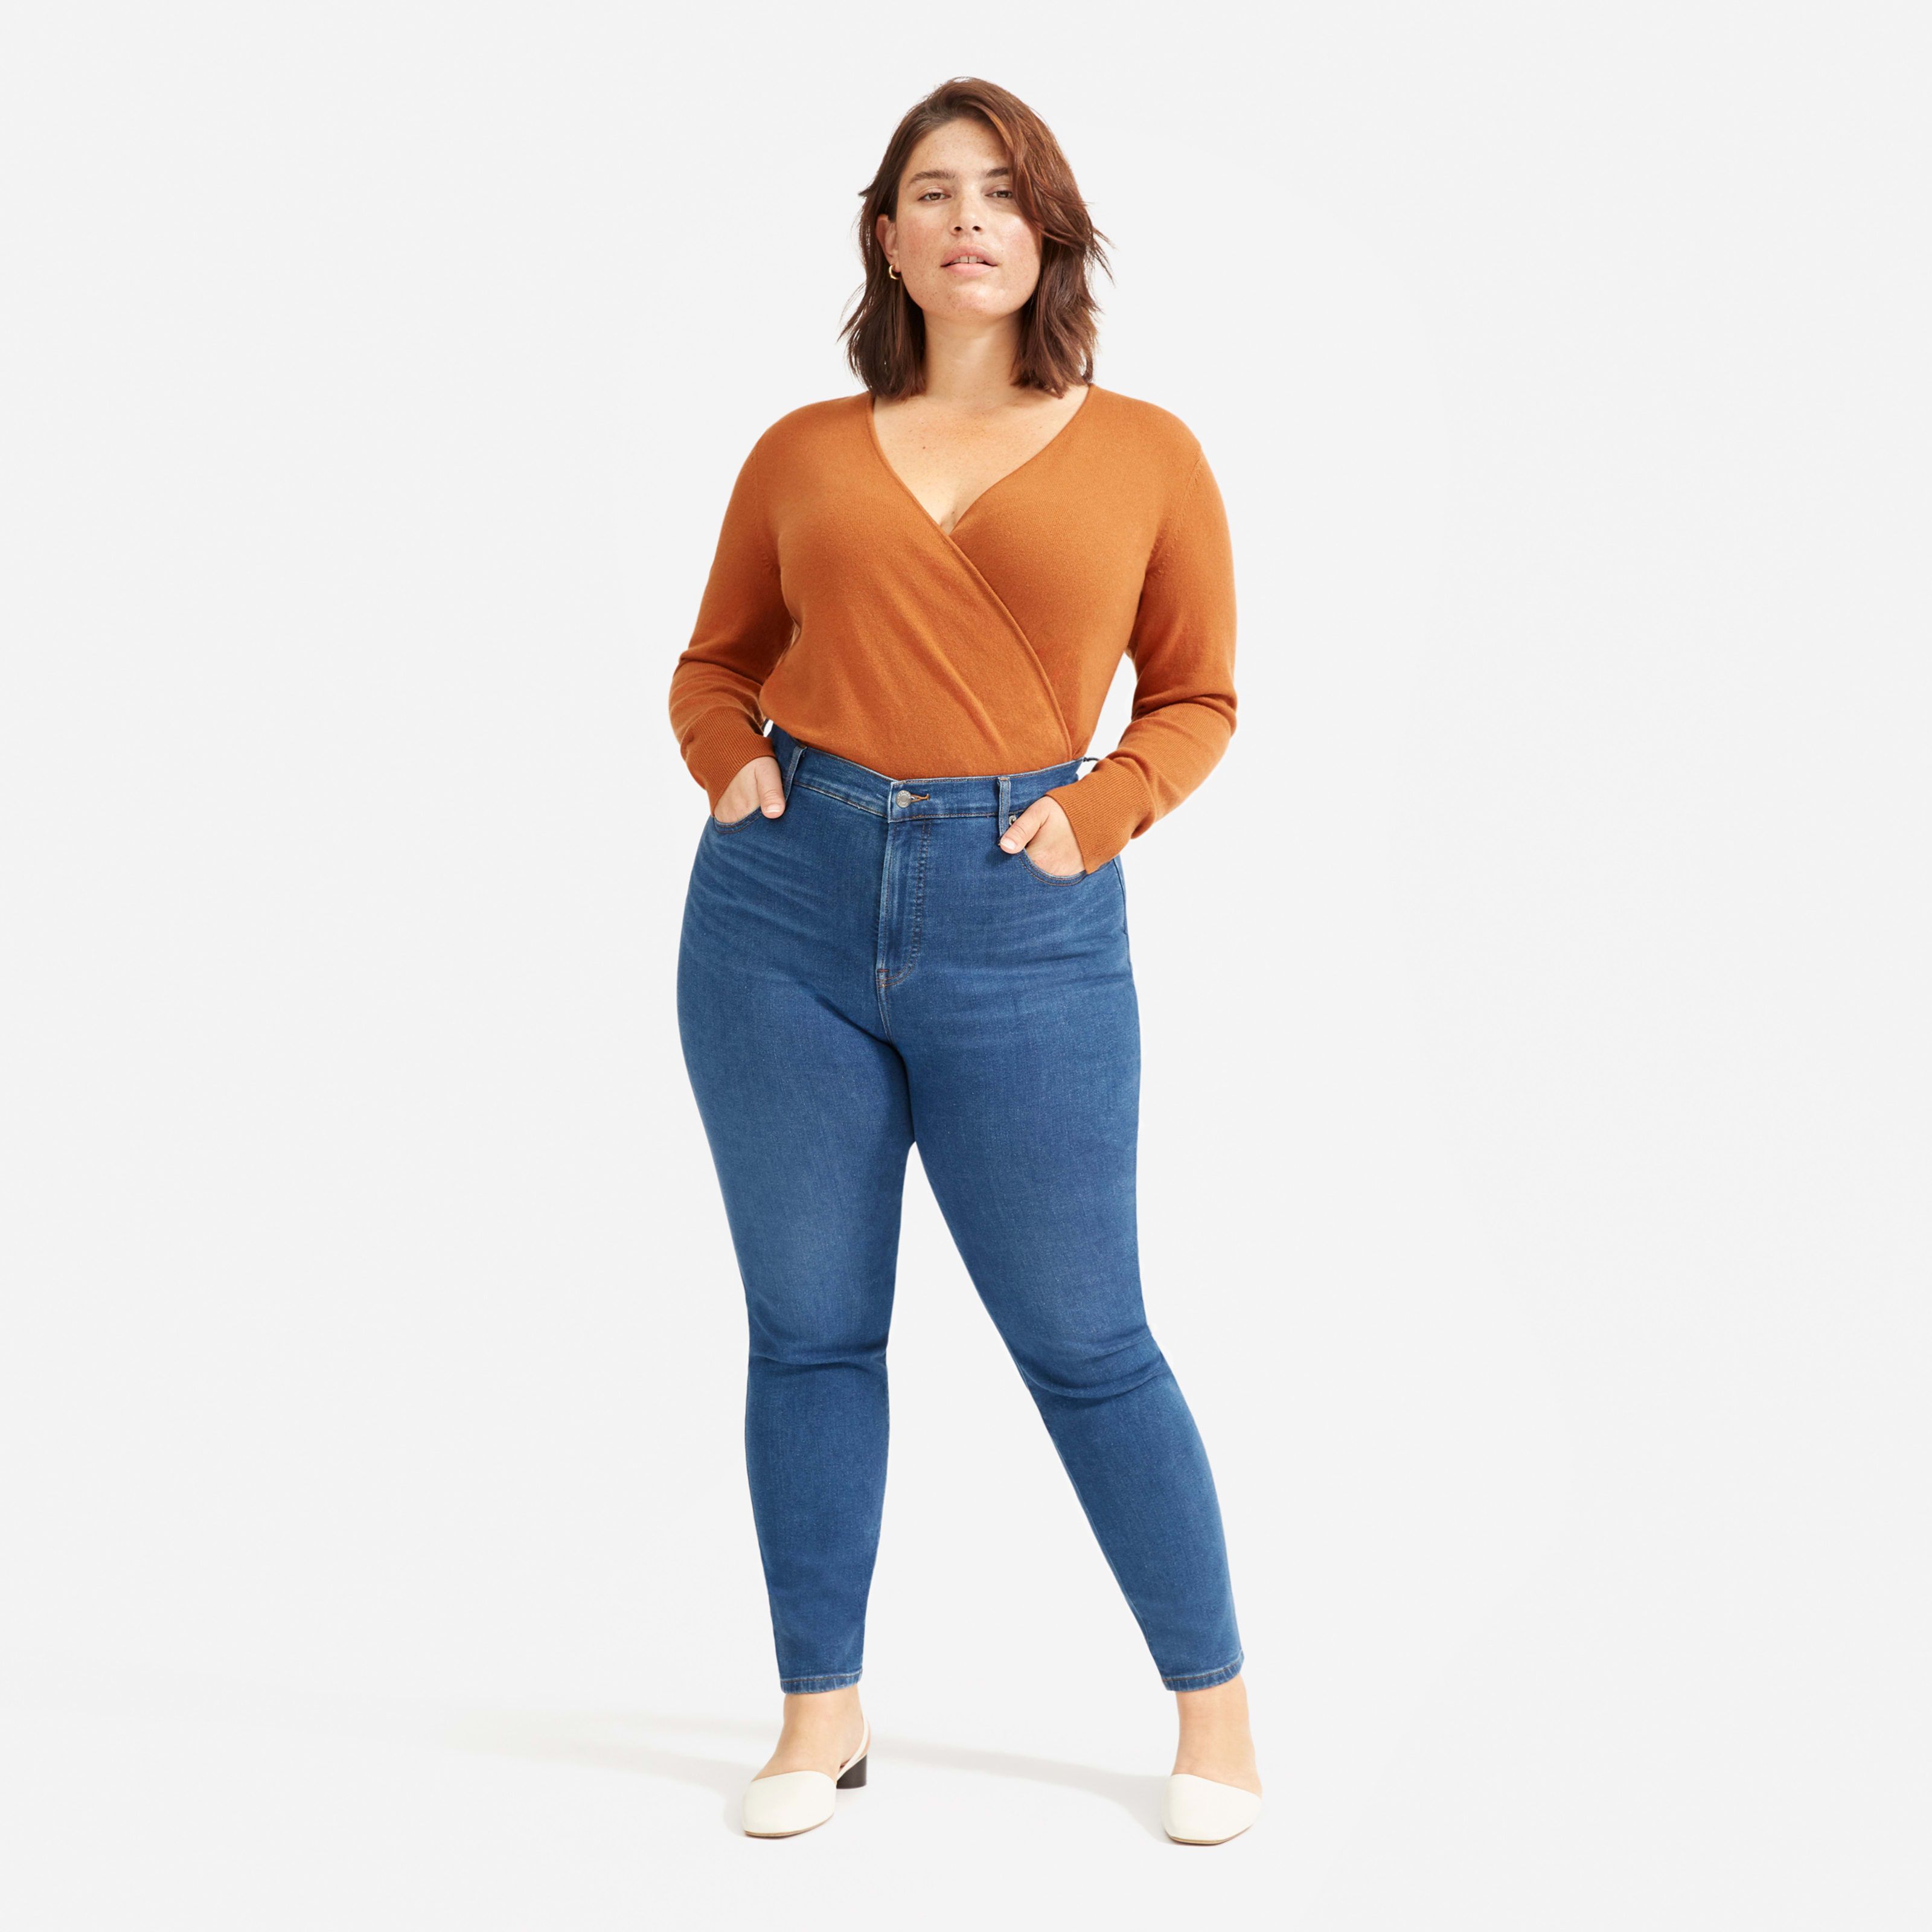 Women's Authentic Stretch High-Rise Skinny by Everlane in Mid Blue, Size 27 | Everlane